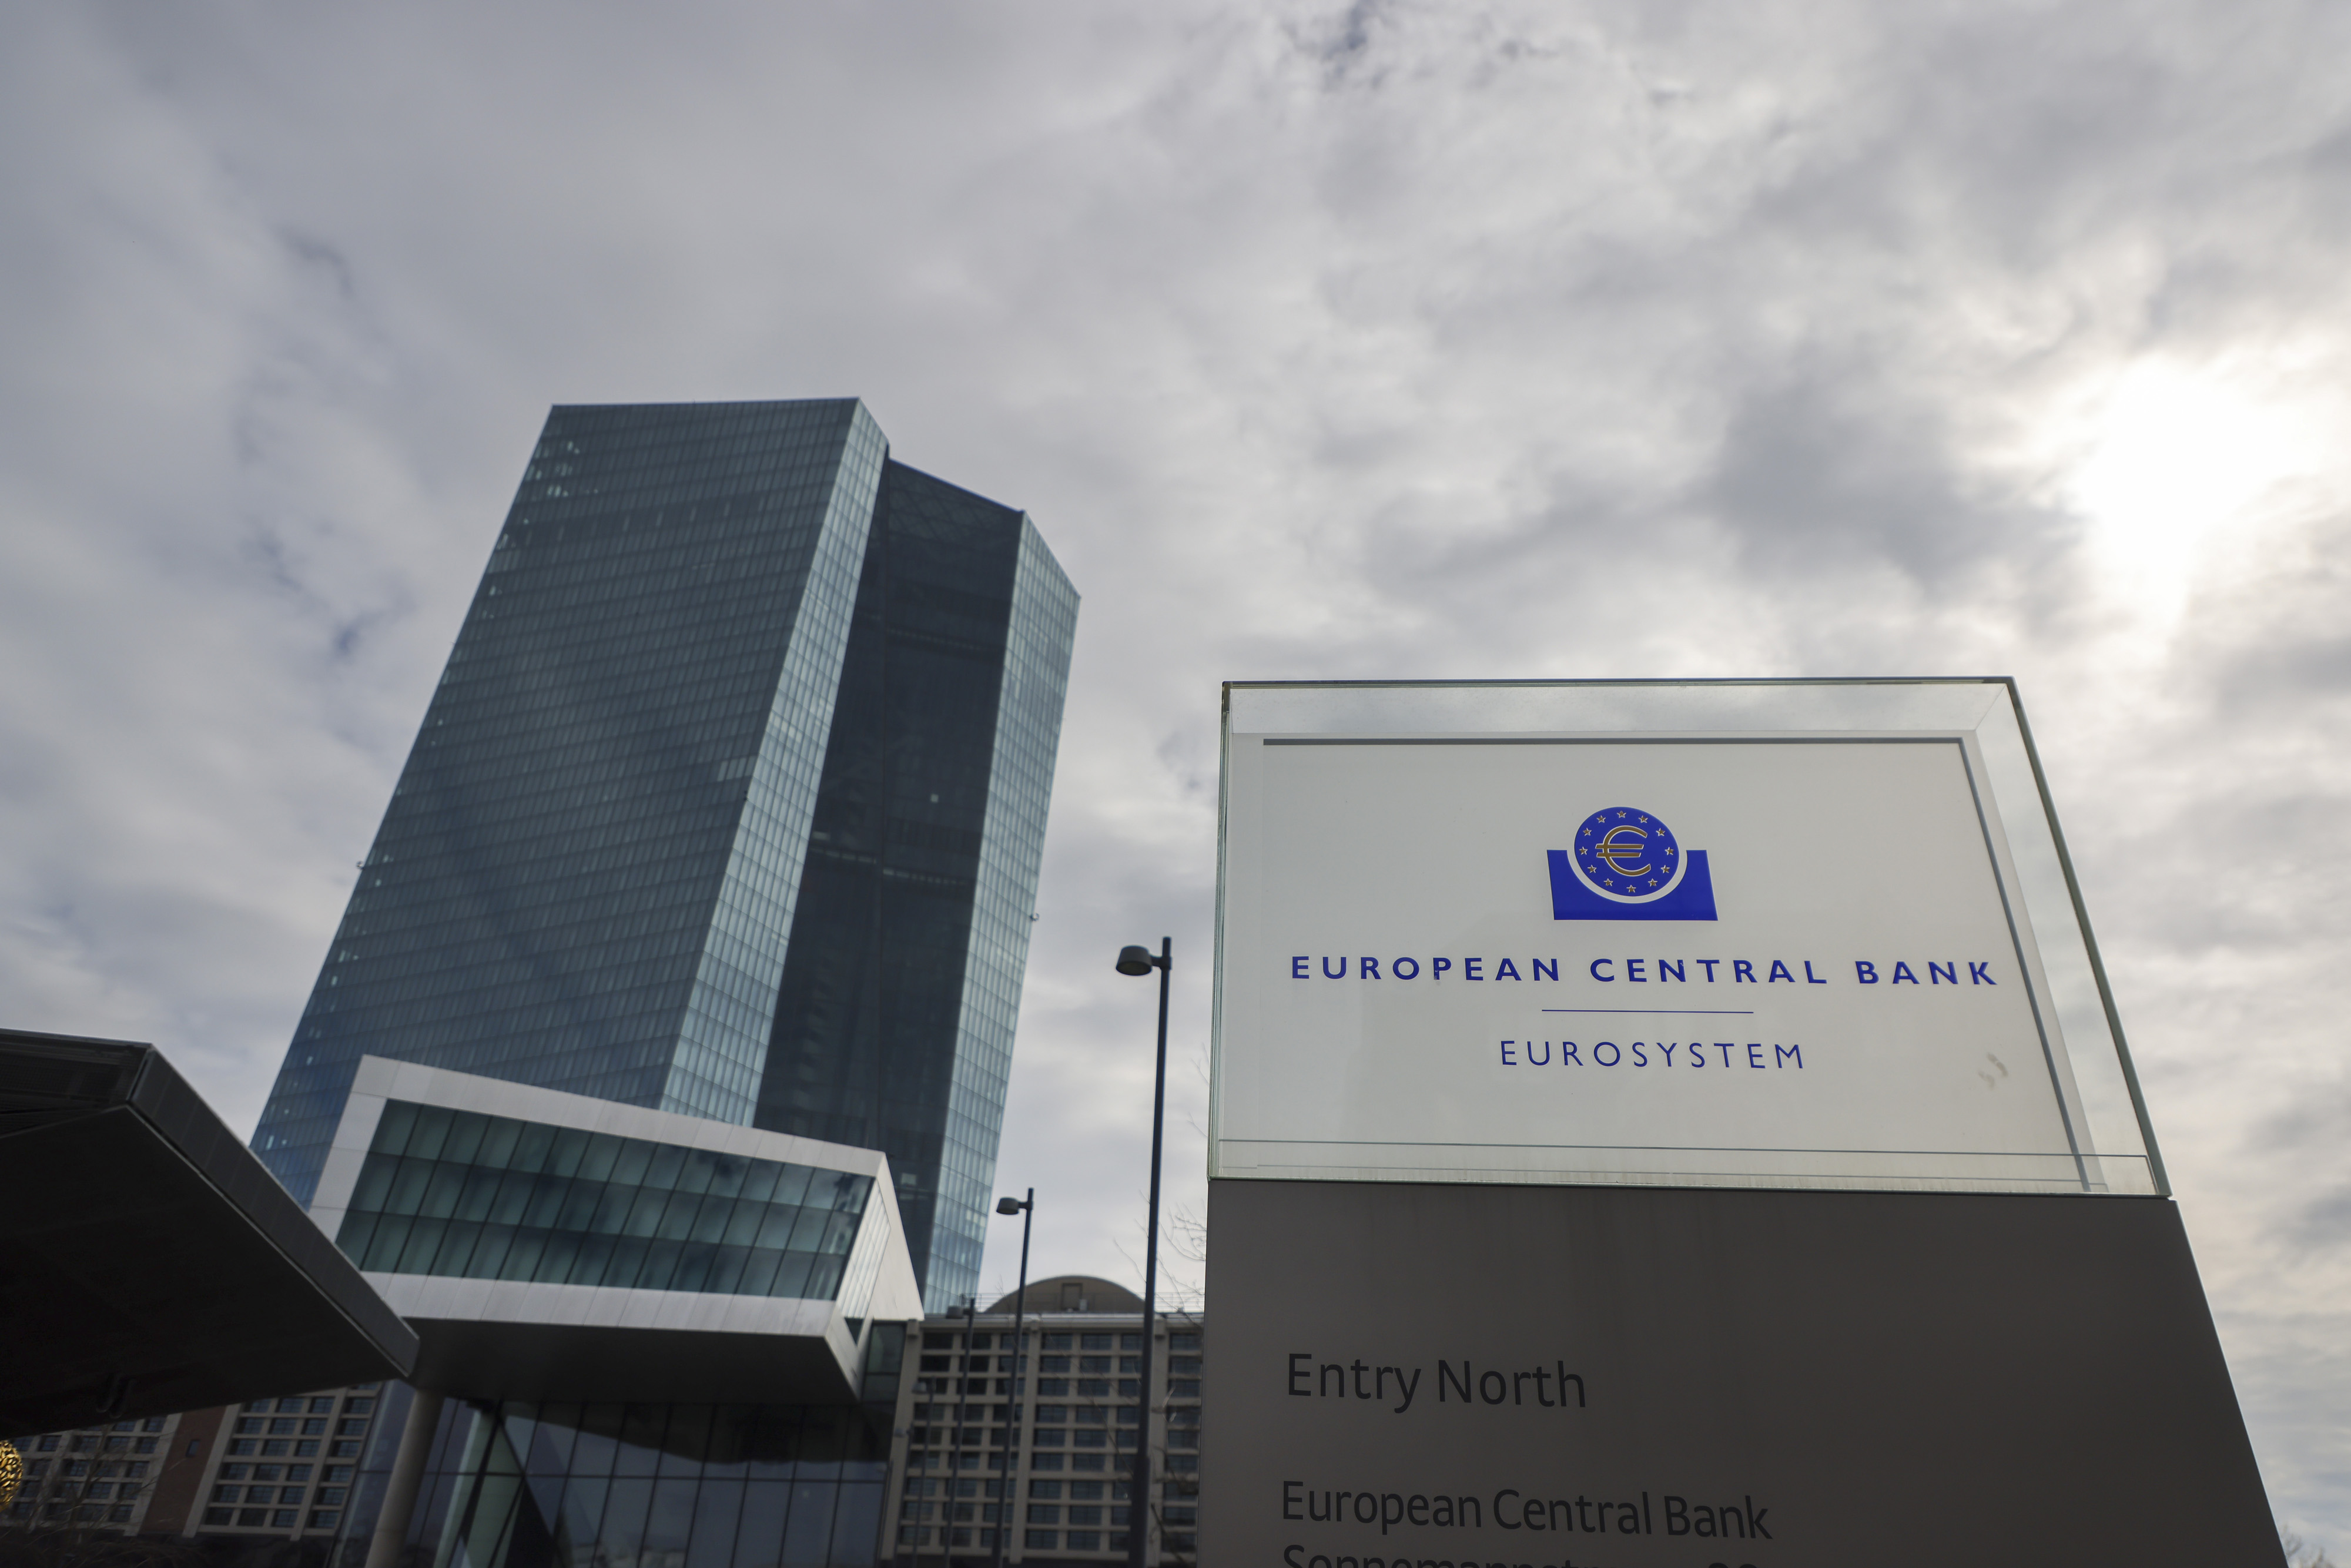 Europe's Biggest Money Managers Bet on Higher ECB Rate - Bloomberg